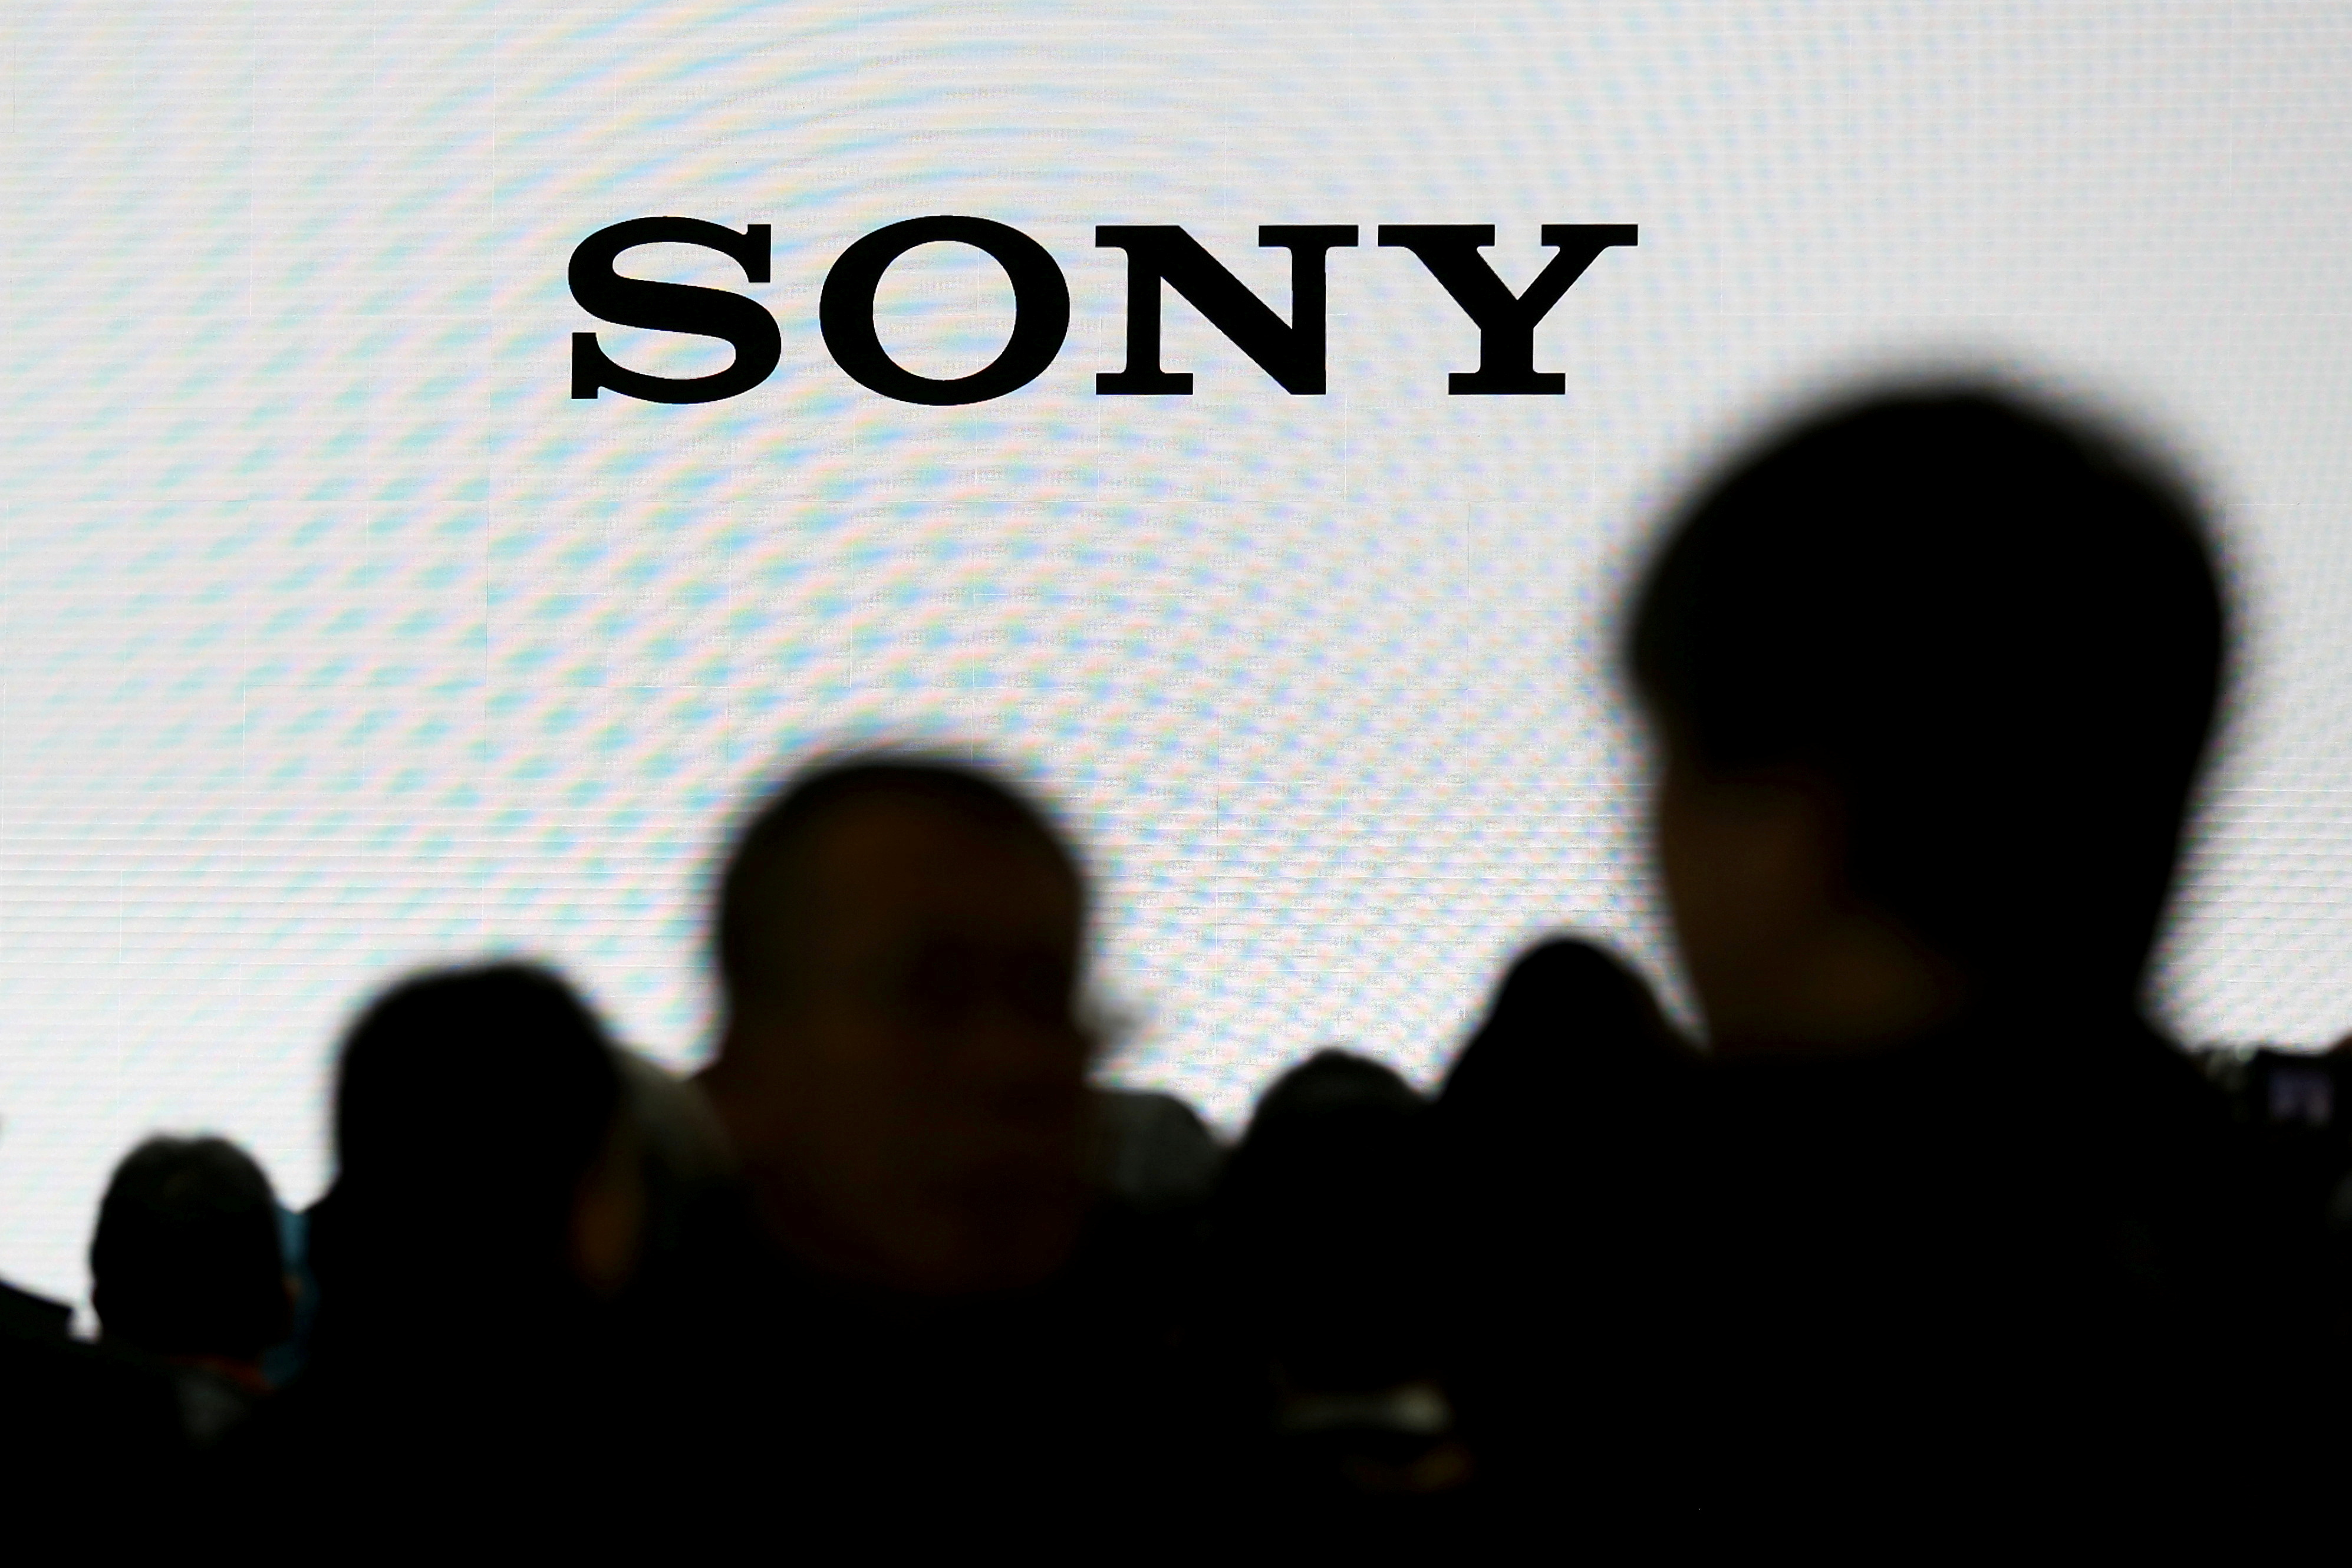 The logo of Sony Corp is seen at the CP+ camera and photo trade fair in Yokohama